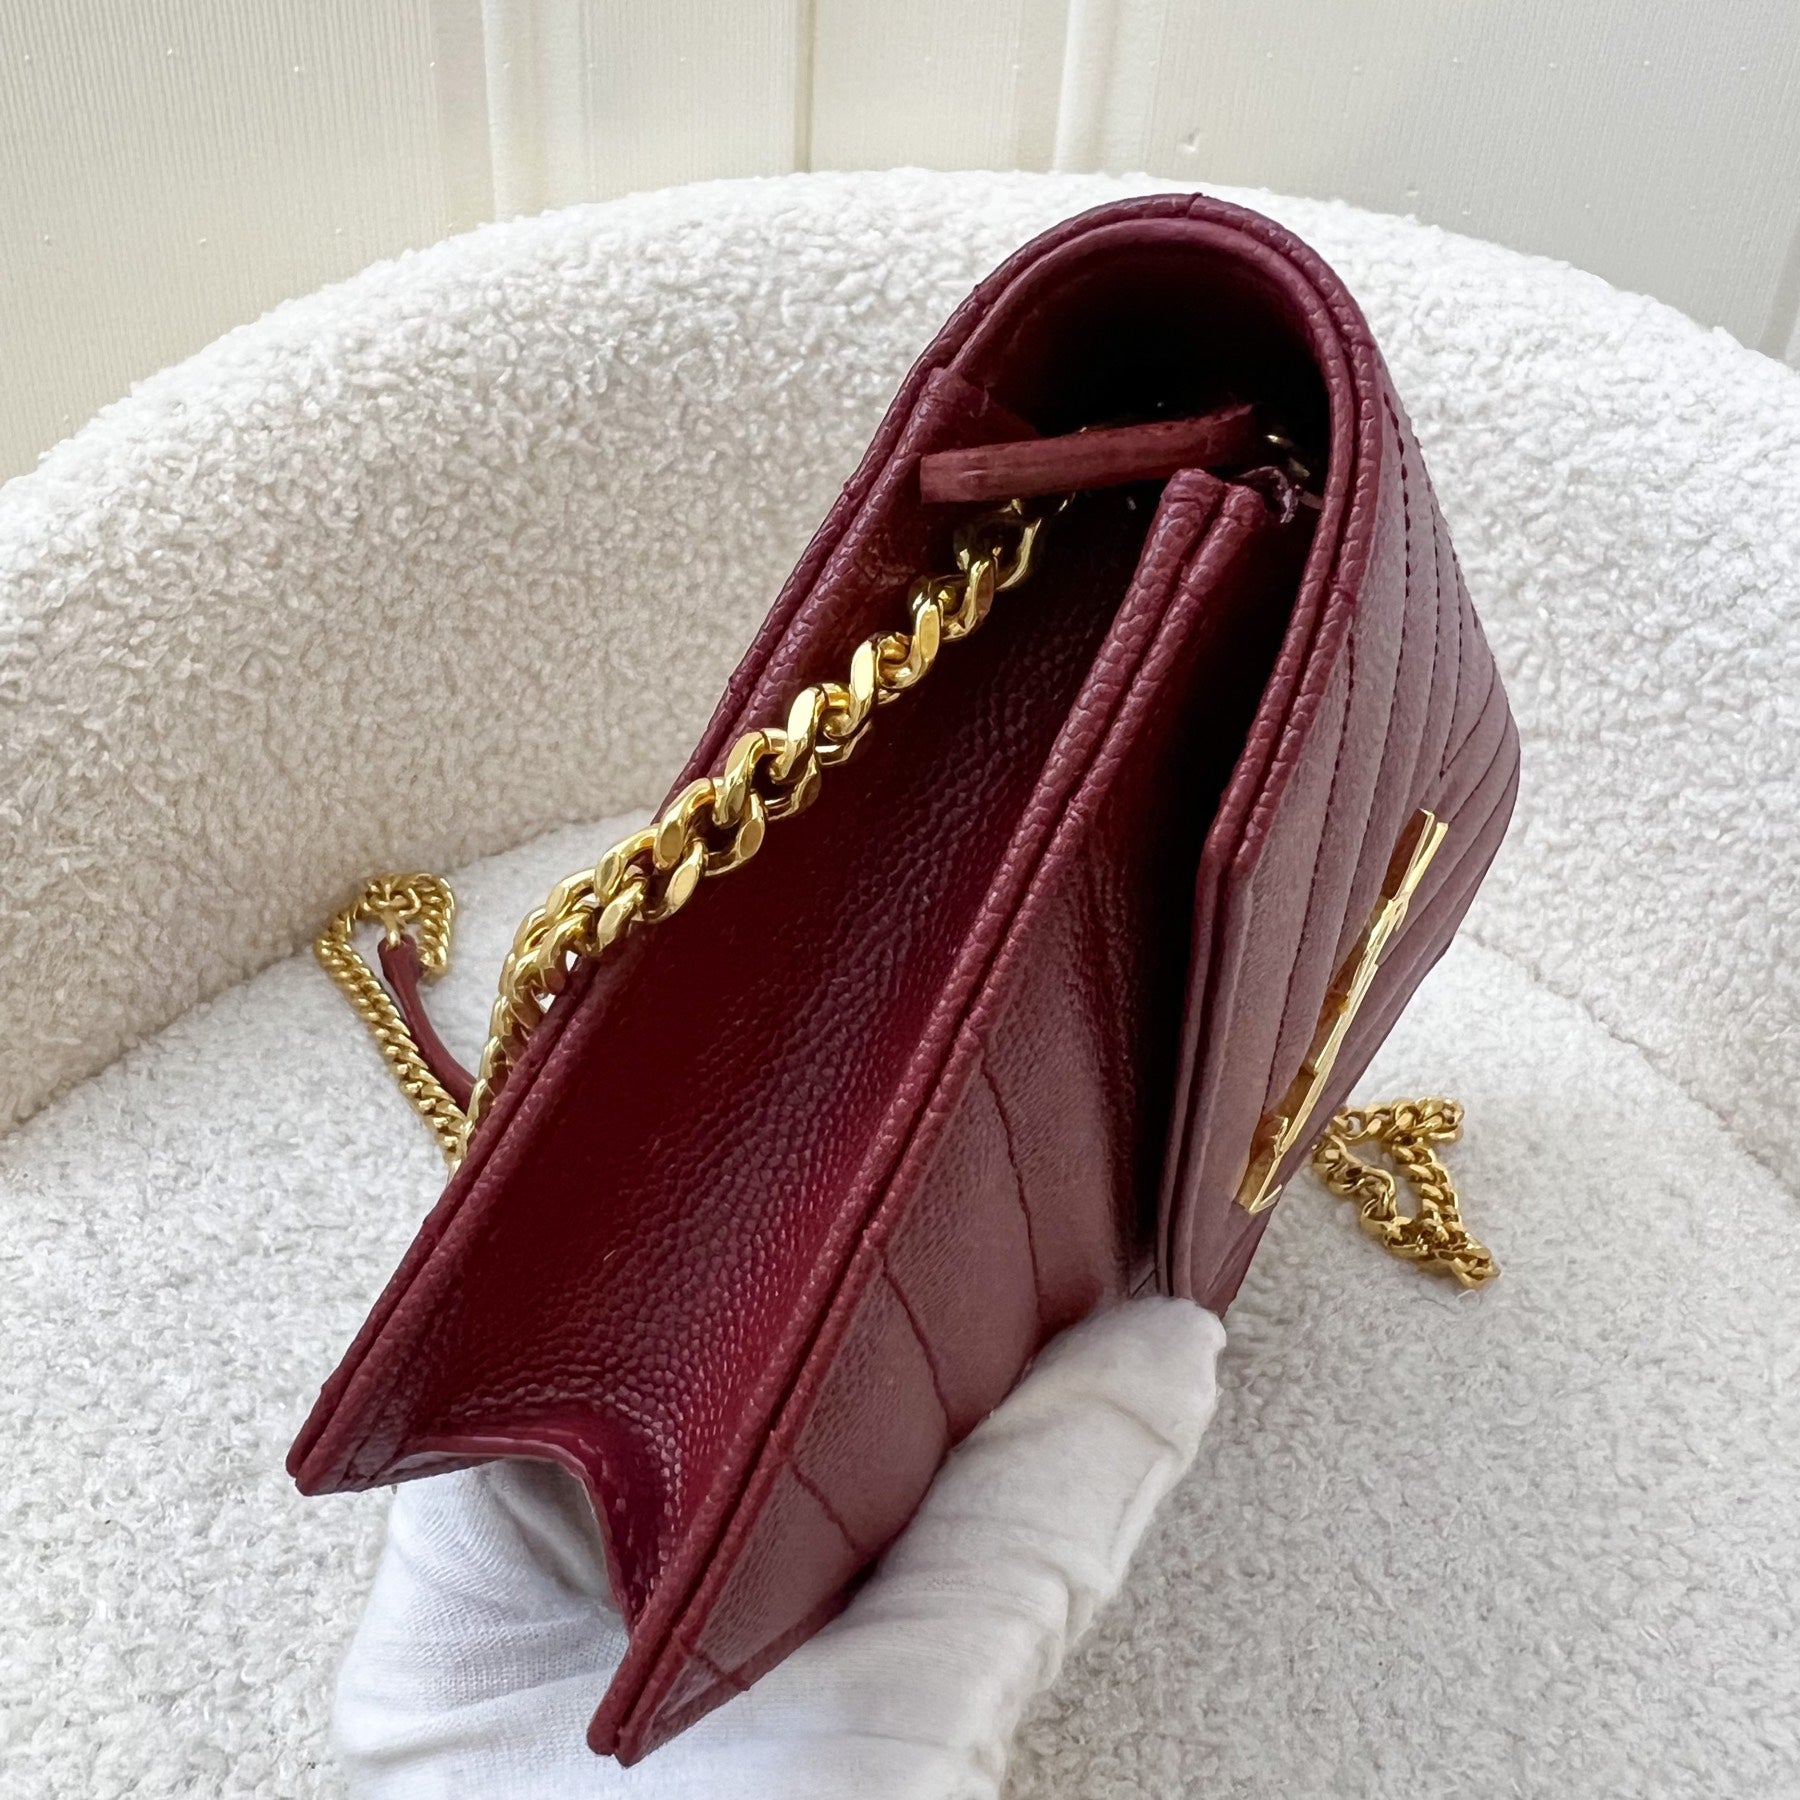 Ysl - Red Grainy Leather Wallet on Chain (WOC)